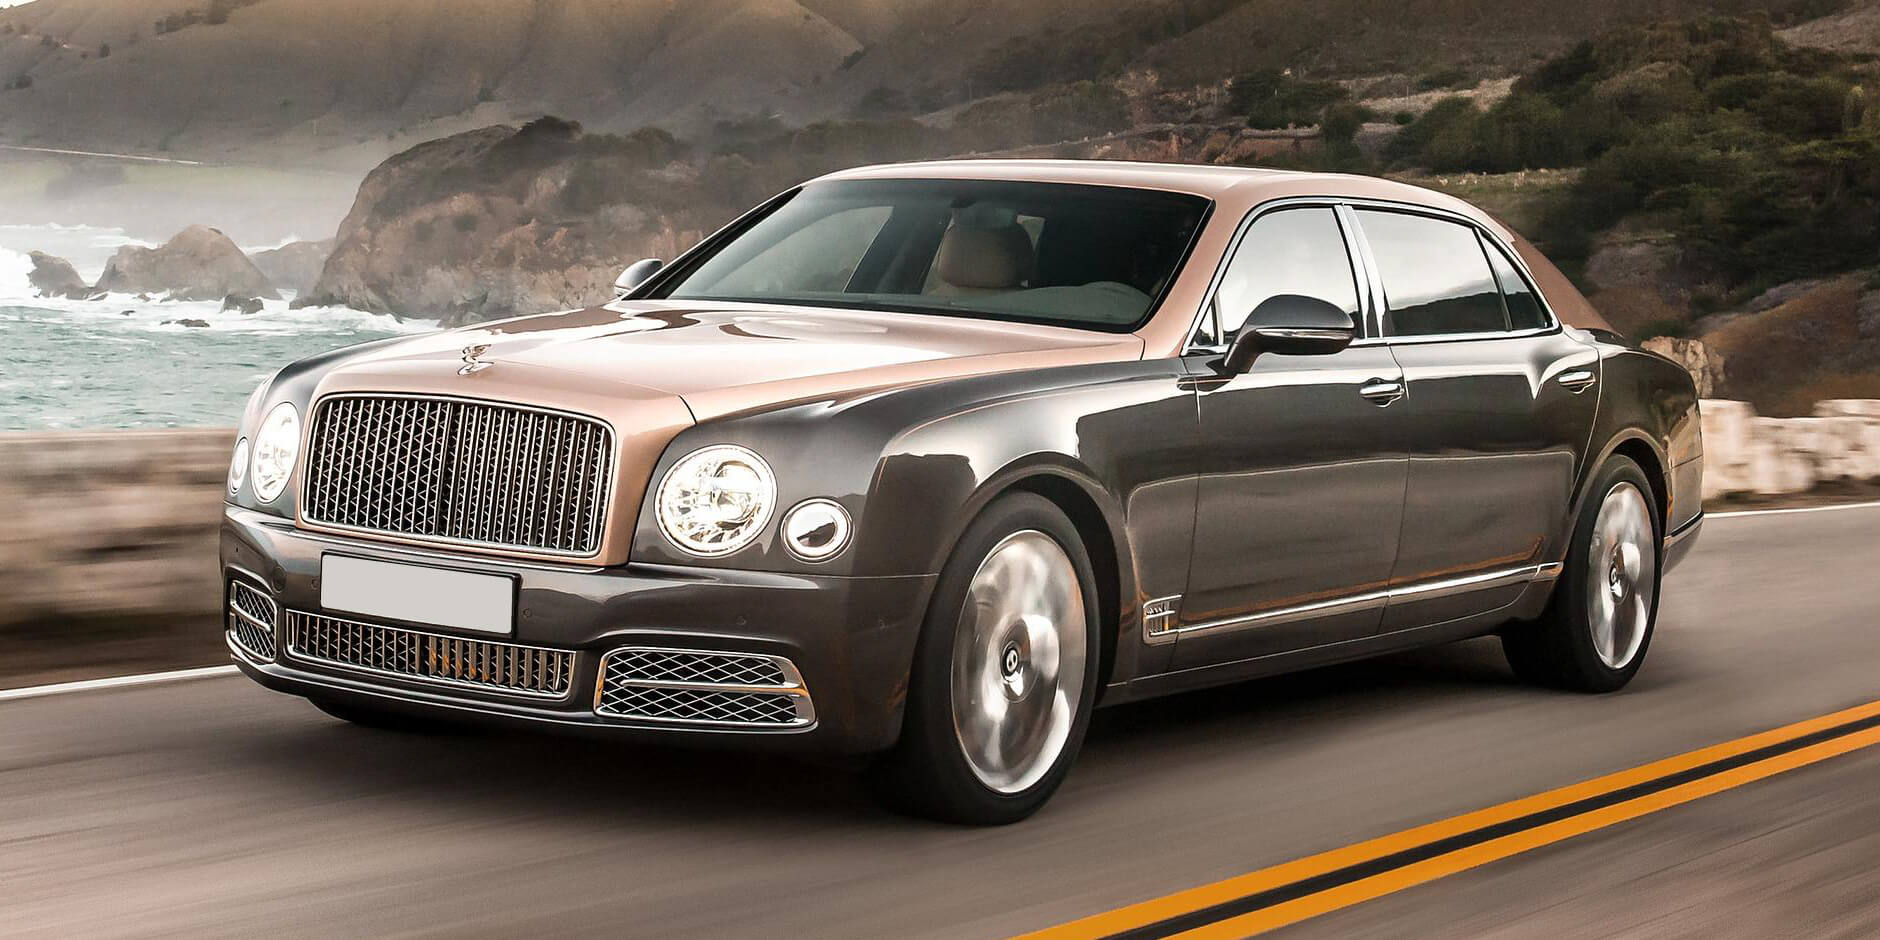 The Complete Guide to Maintaining Your Bentley Mulsanne for Peak Performance in the Cornish Climate